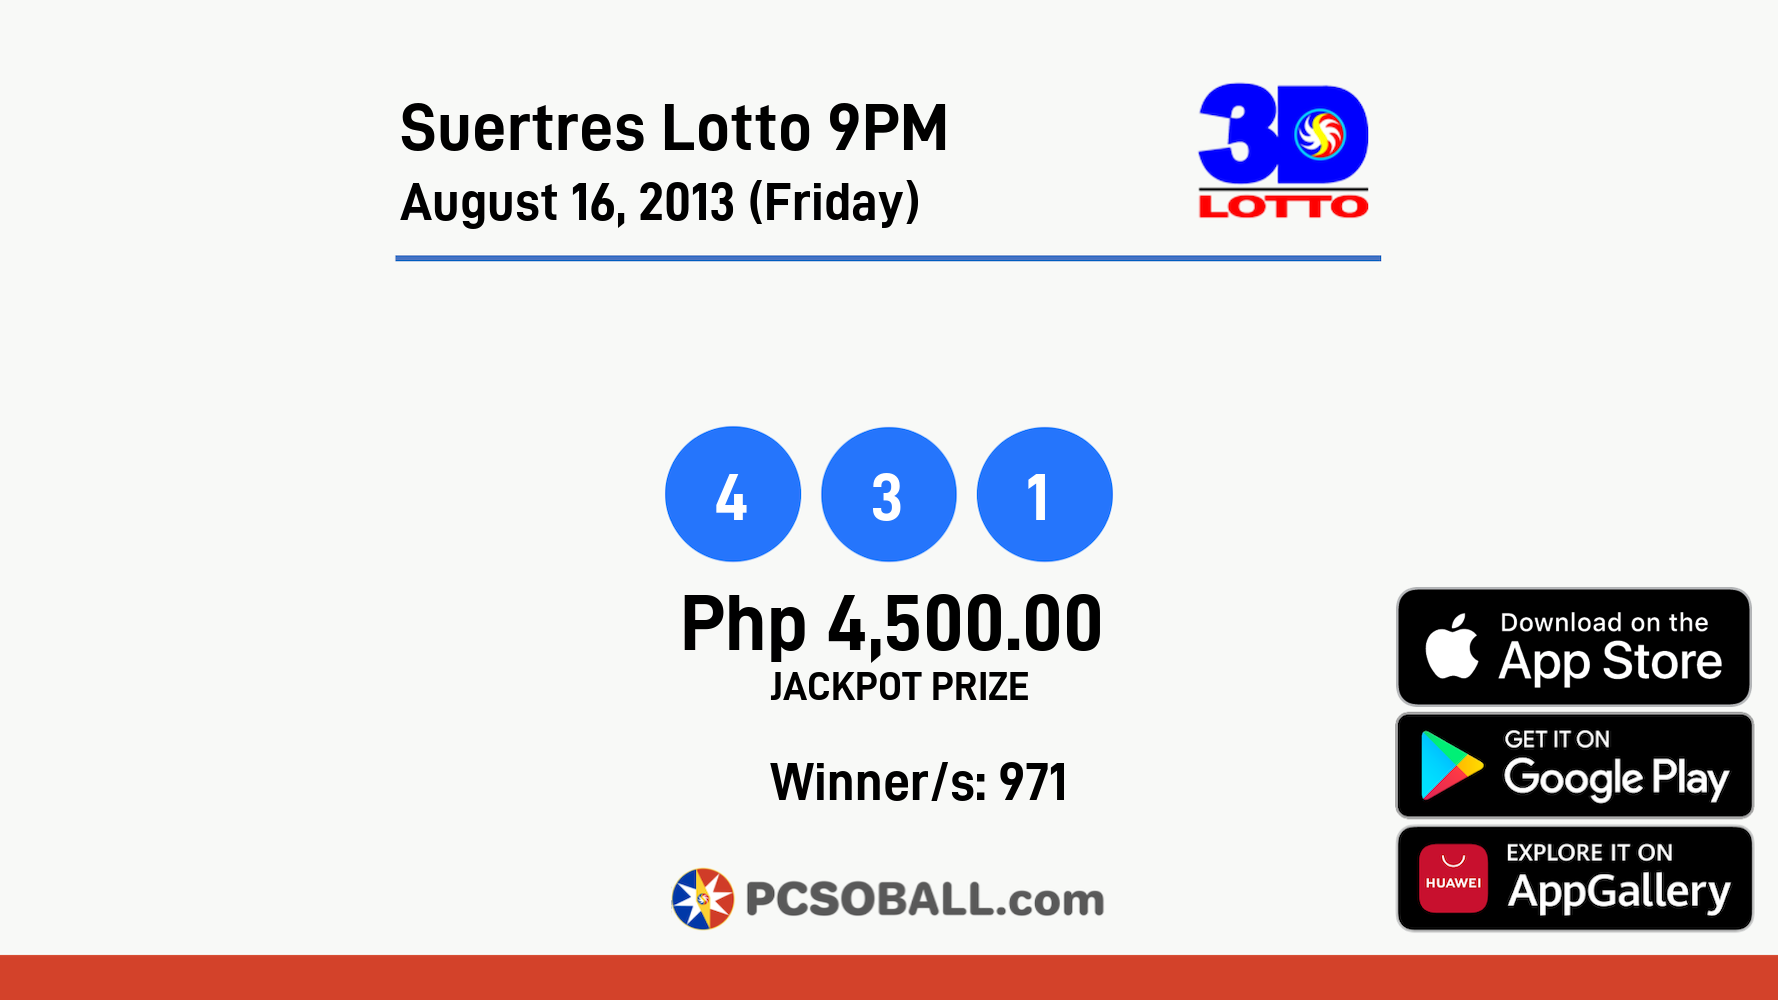 Suertres Lotto 9PM August 16, 2013 (Friday) Result